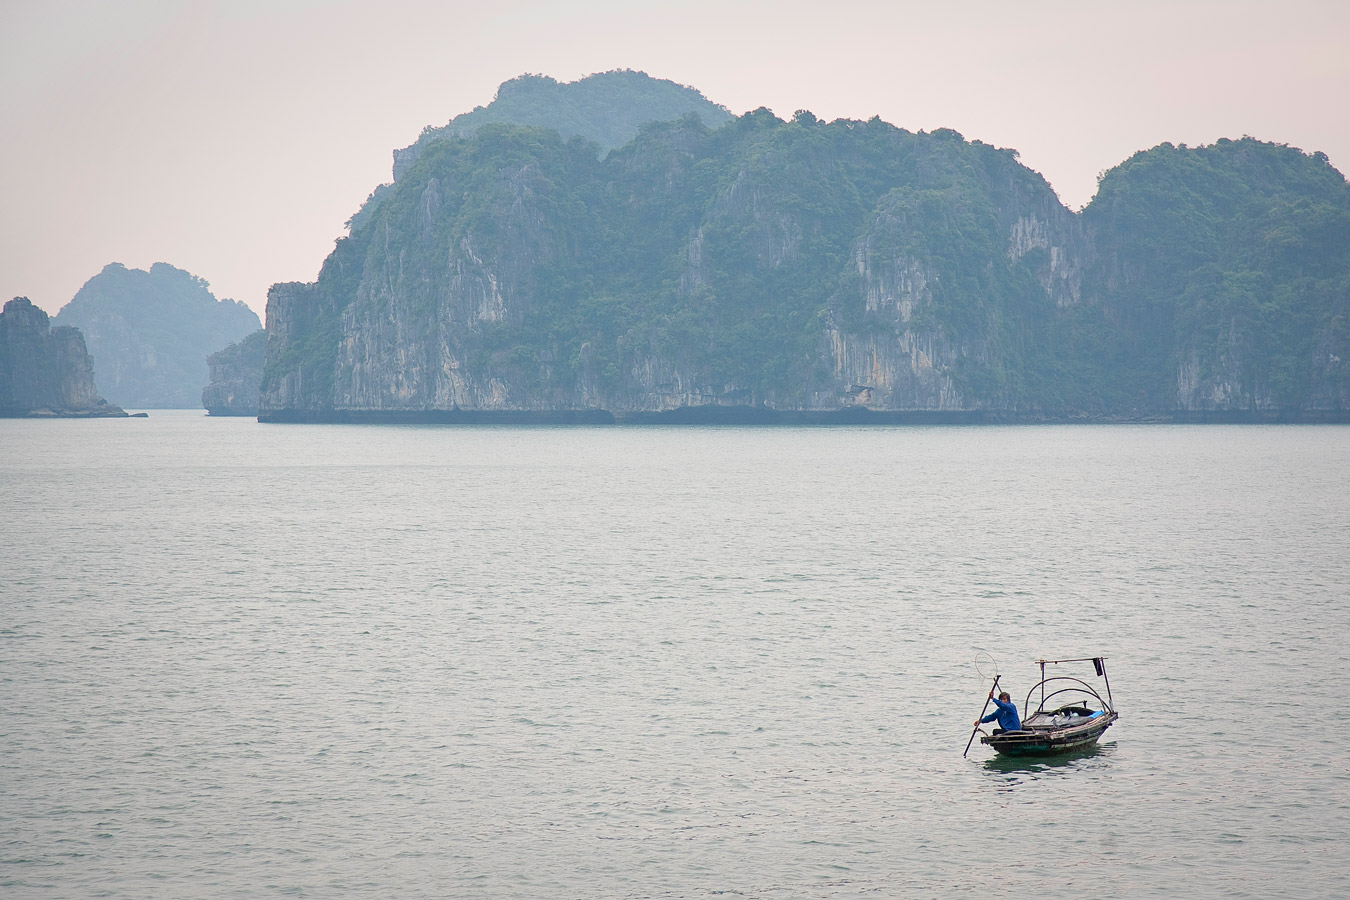 Vietnam travel photography by Sharon Blance, Melbourne photographer